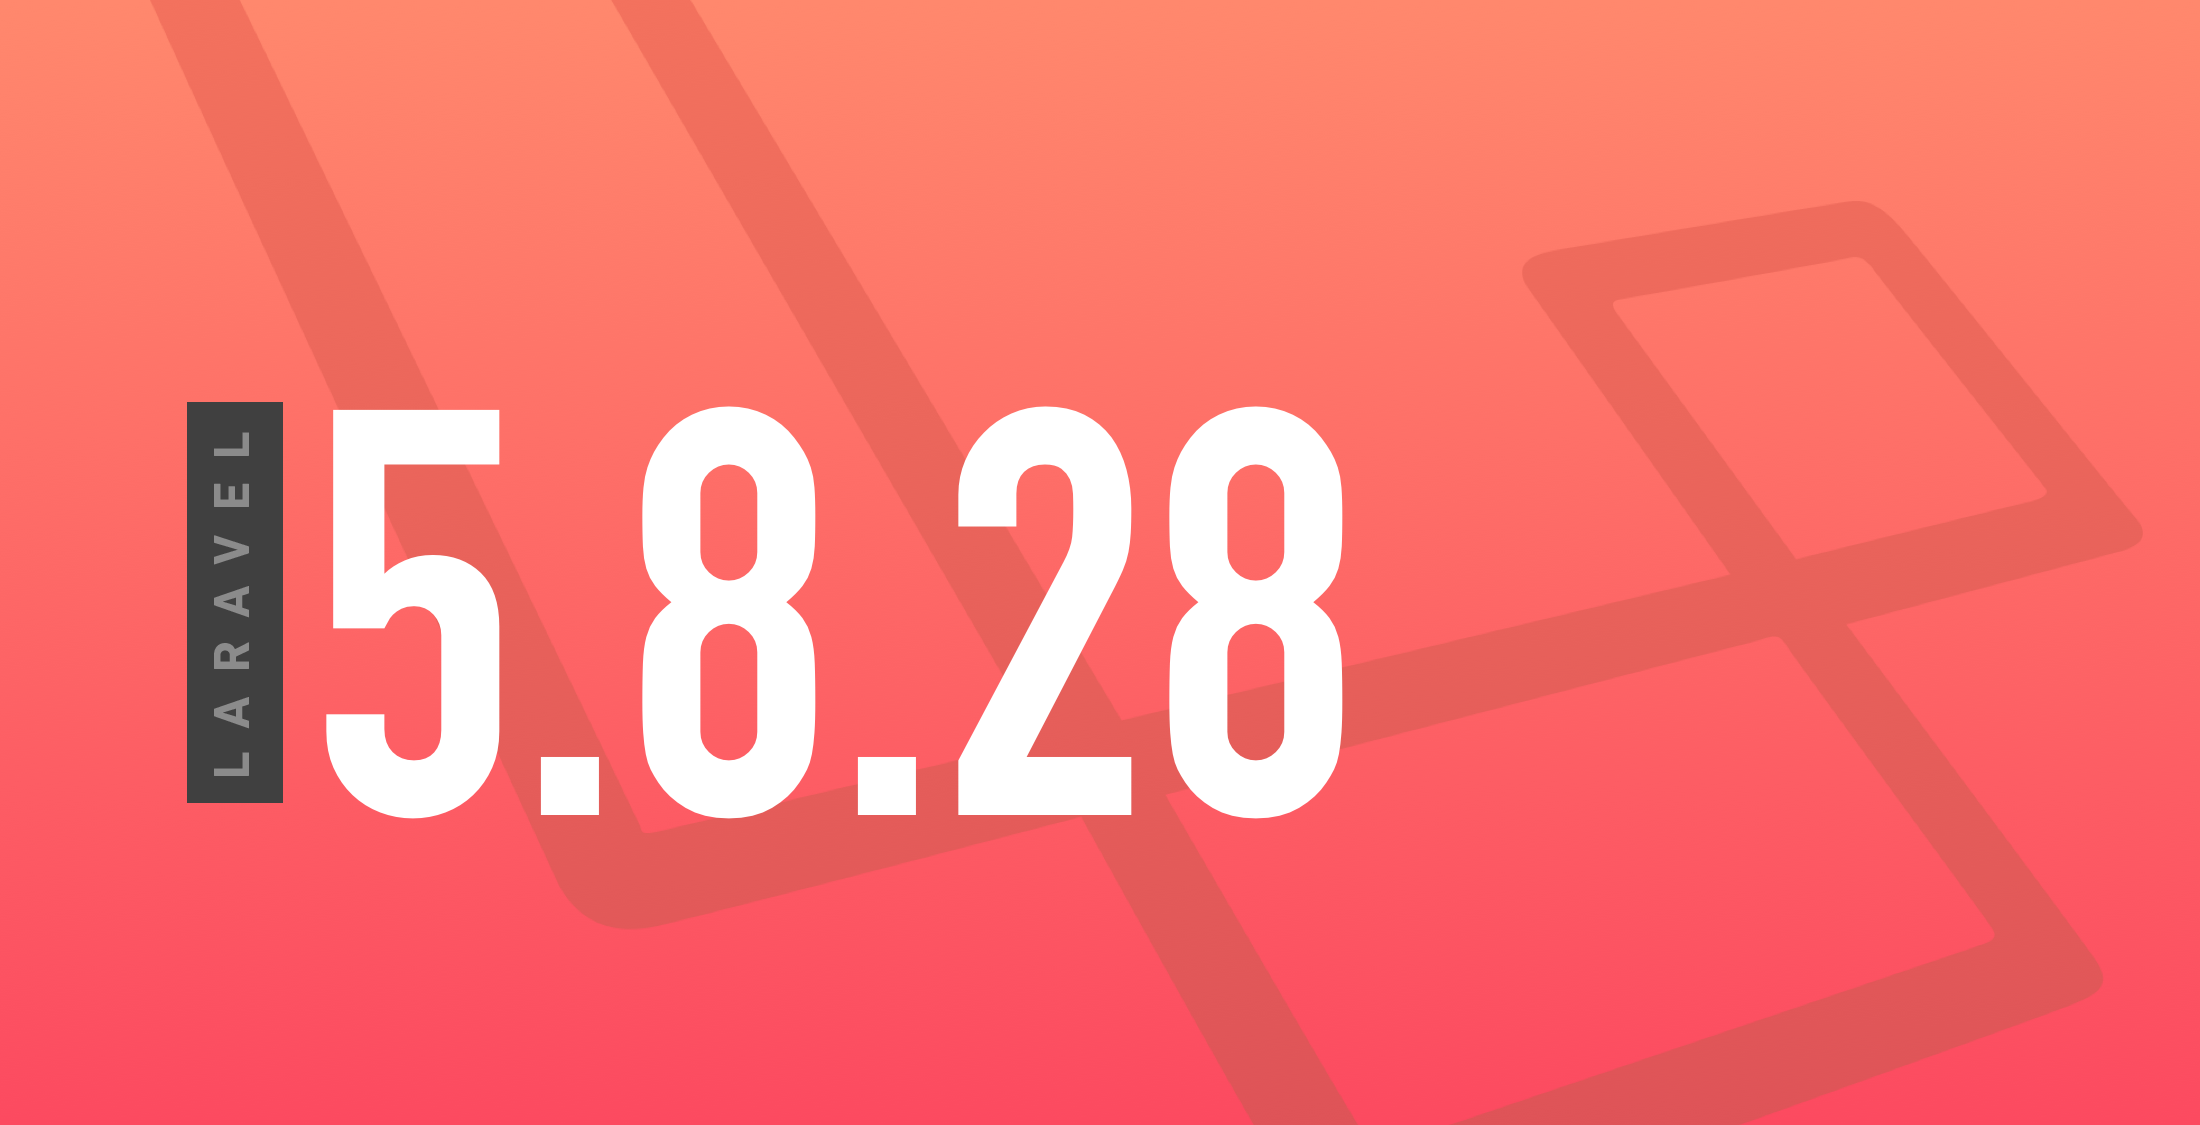 New Merge and Replace Collection Methods in Laravel 5.8.28 image